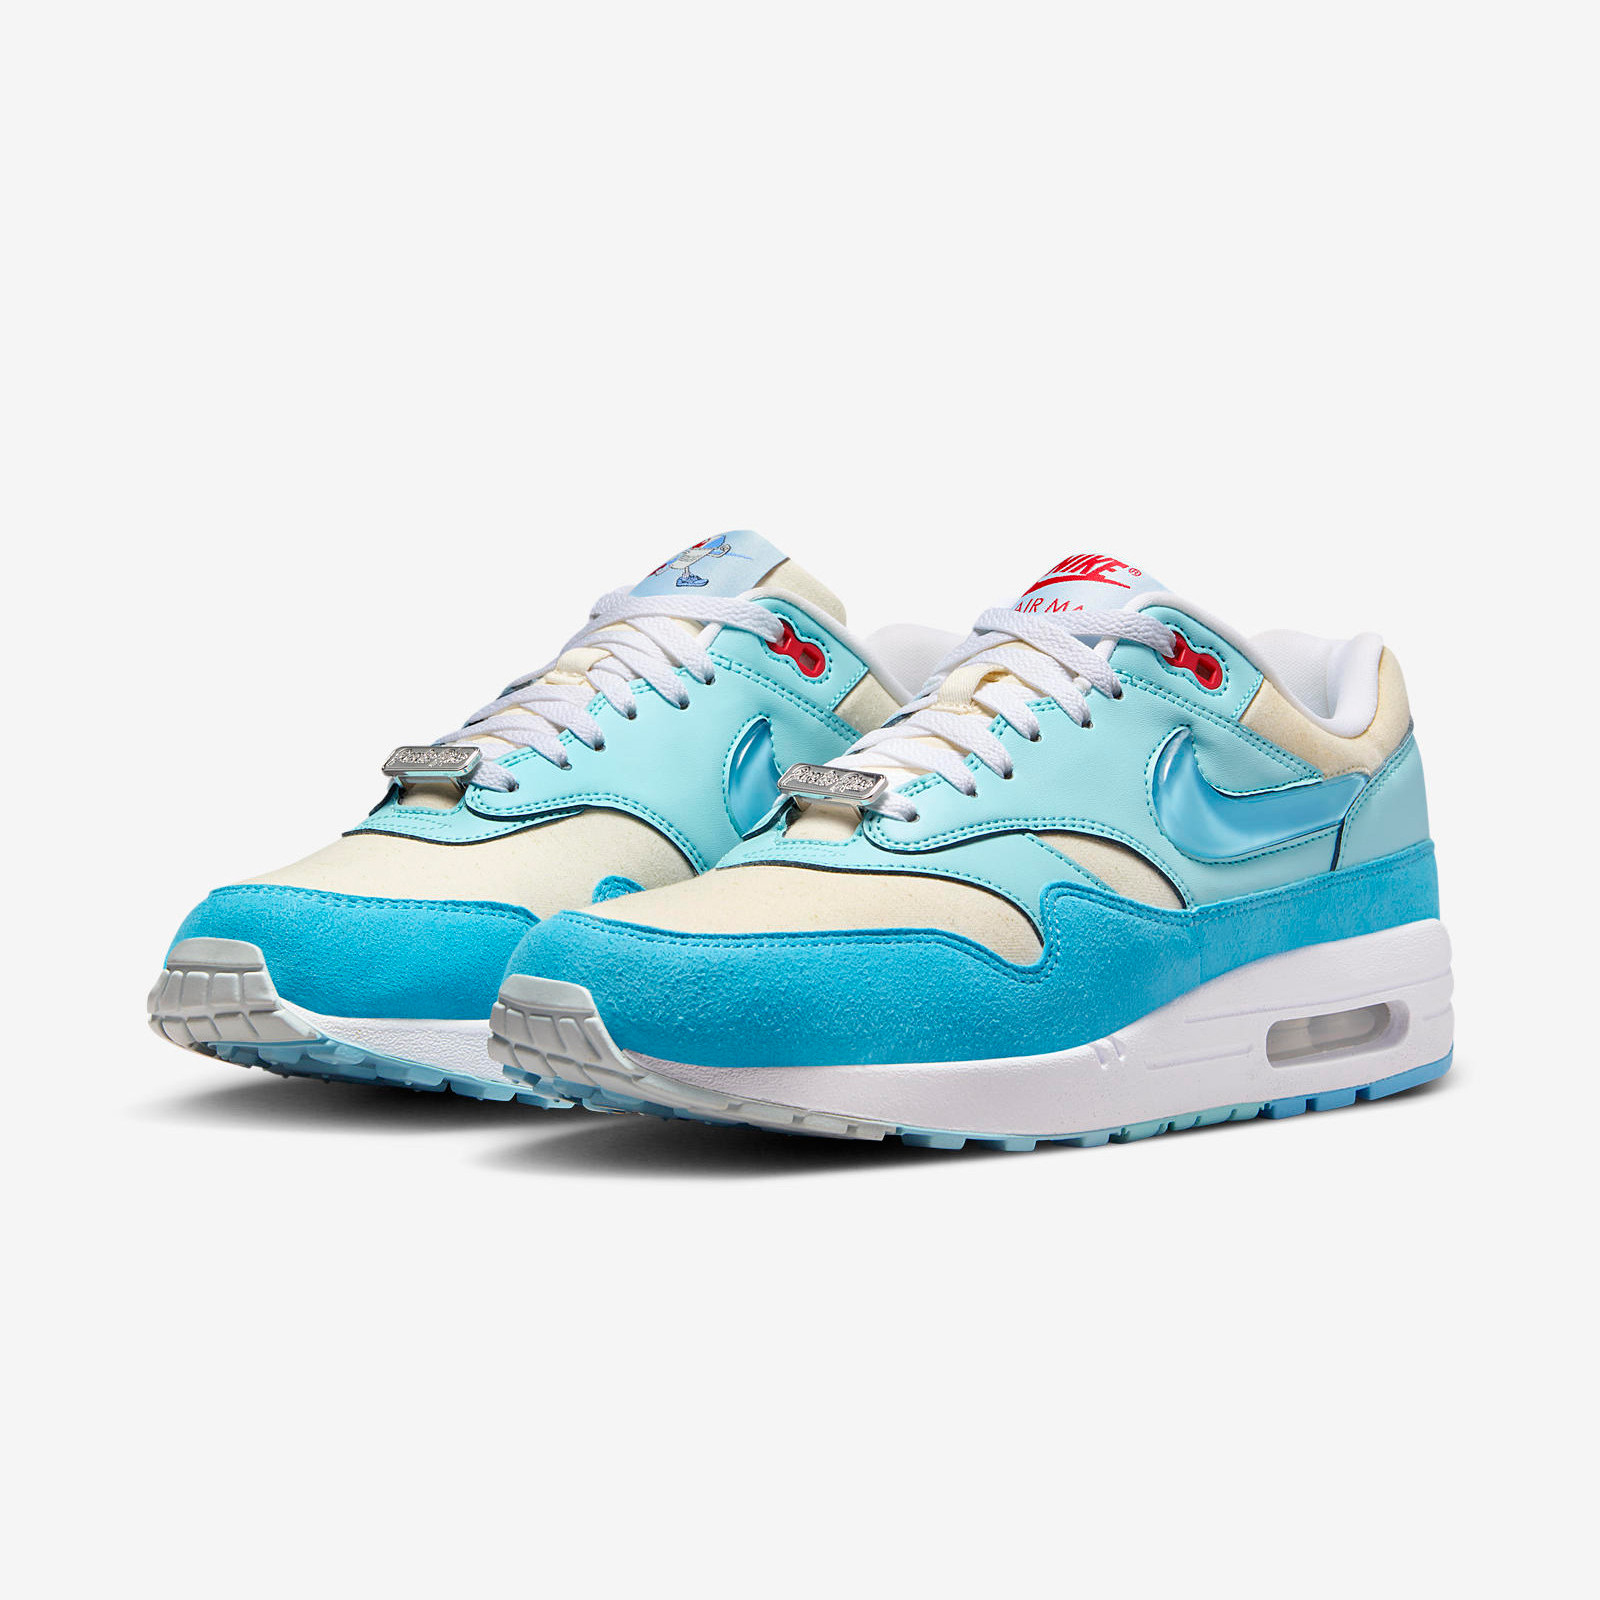 Puerto Rican Day x Nike
Air Max 1
« Blue Gale »